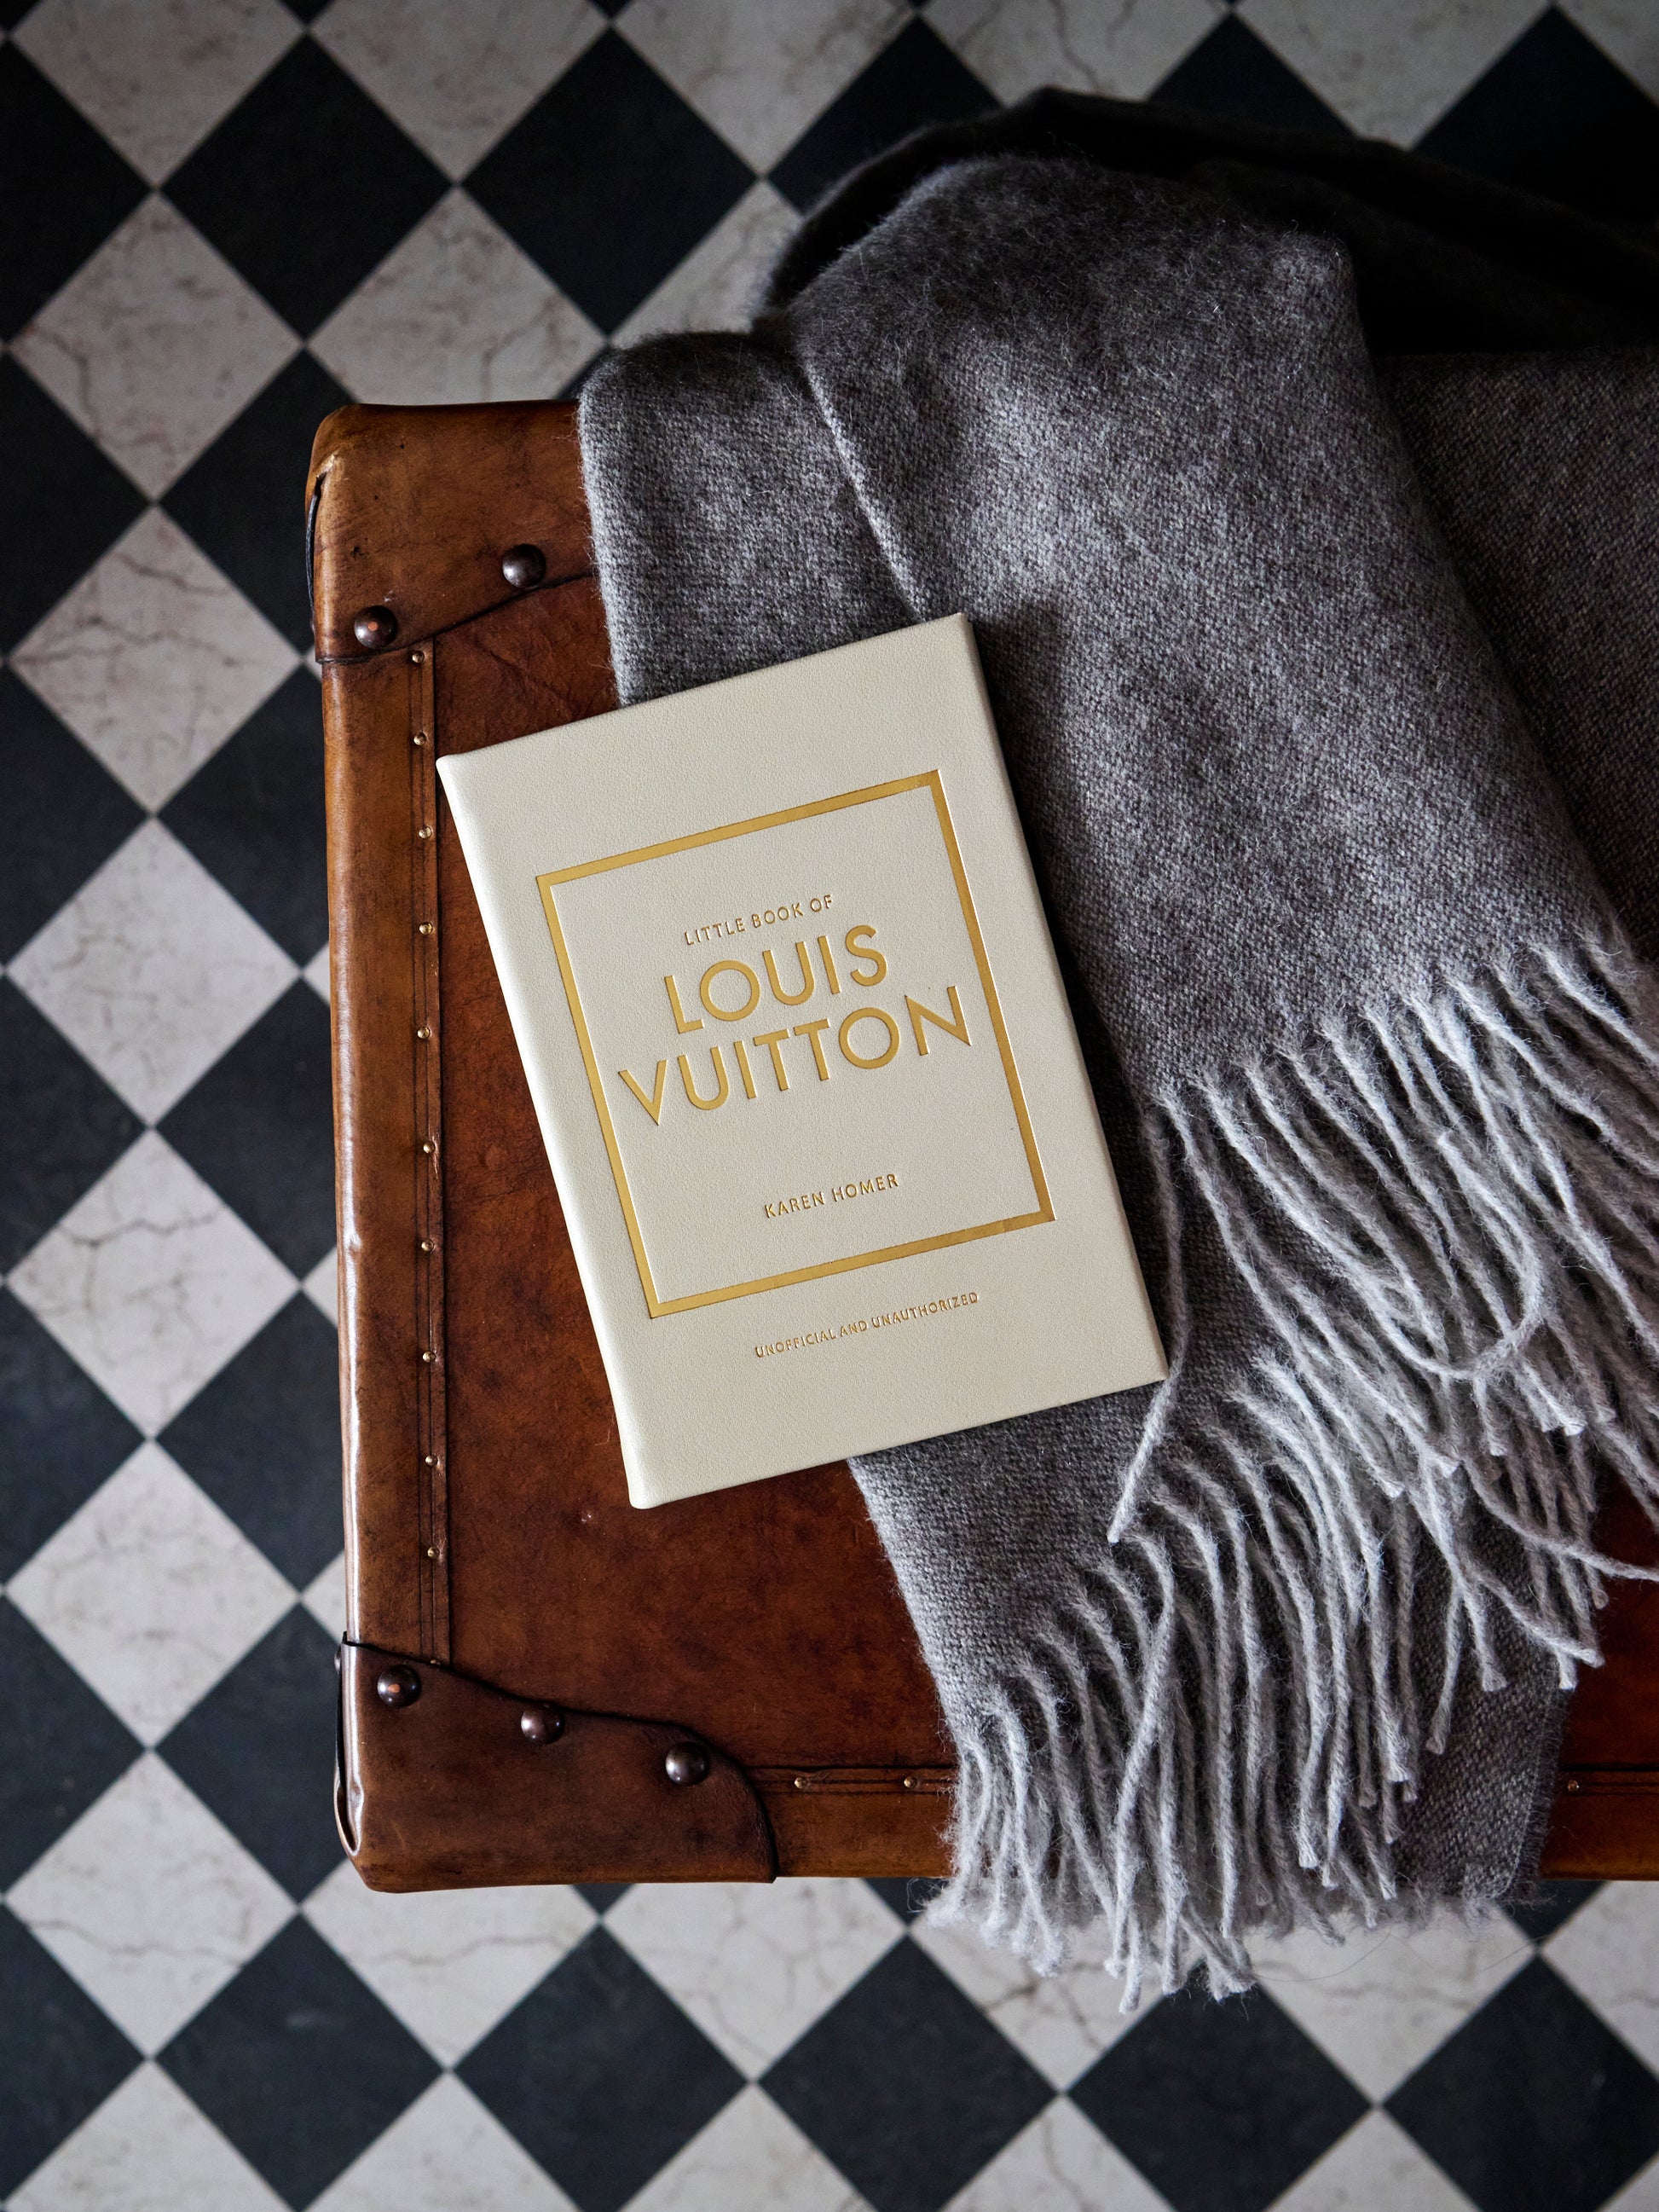 Shop the Little Book of Louis Vuitton Leather Bound Edition at Weston Table